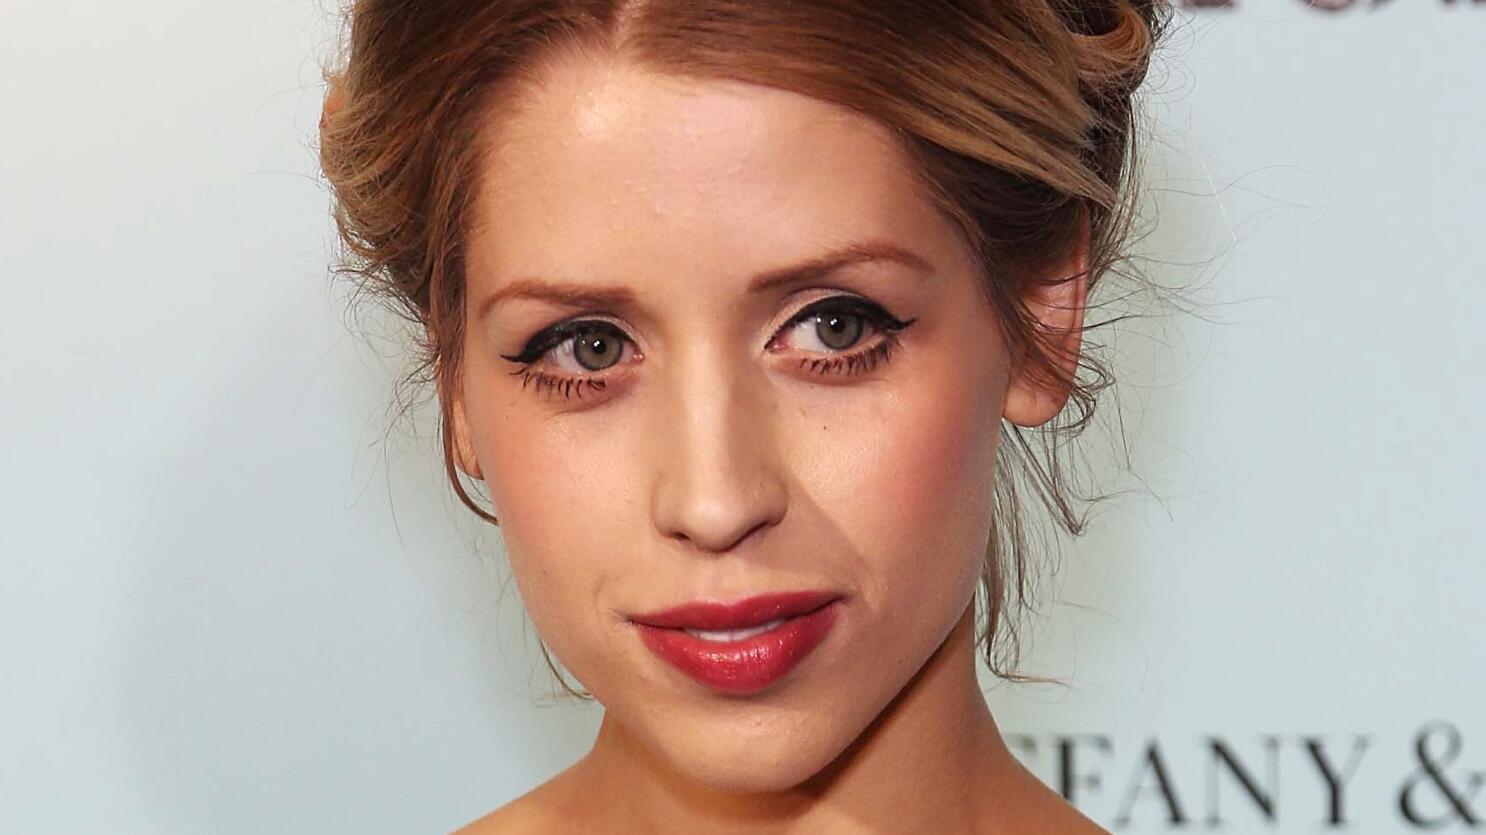 Peaches Geldof cause of death: Socialite had taken fatal dose of heroin  after years of addiction, inquest concludes, The Independent